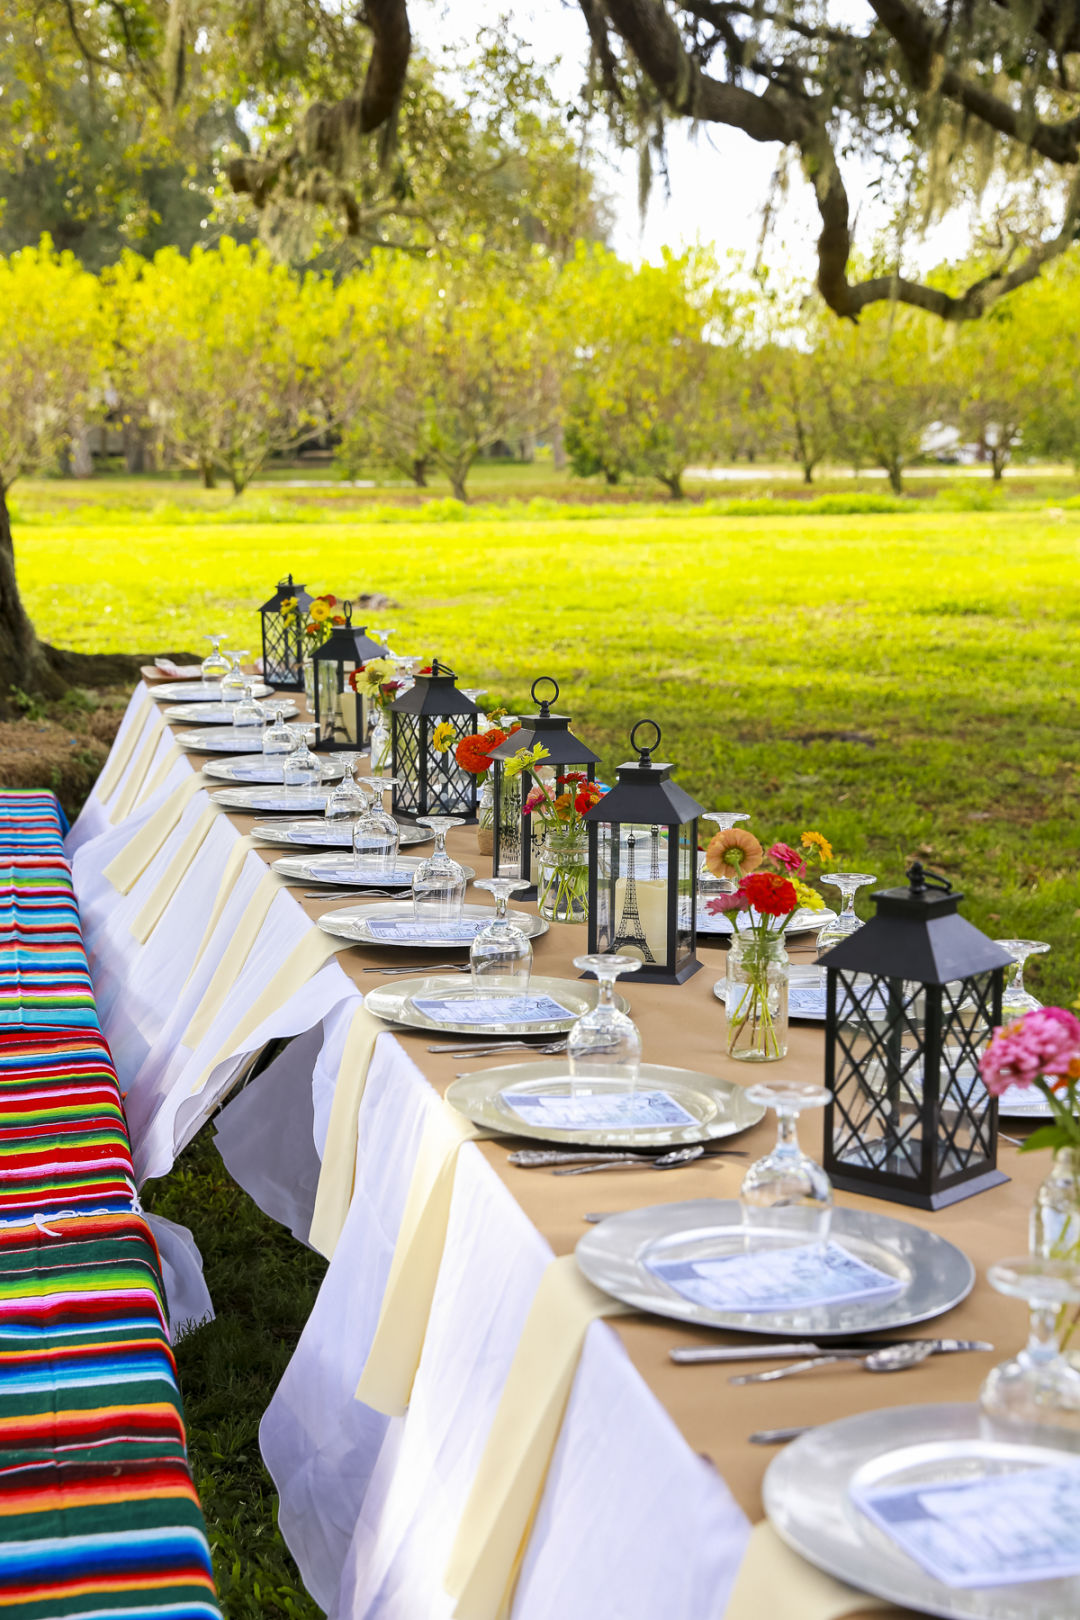 Outdoor-Event How to Plan Outdoor Events 101: Throw a Safe and Fun Party